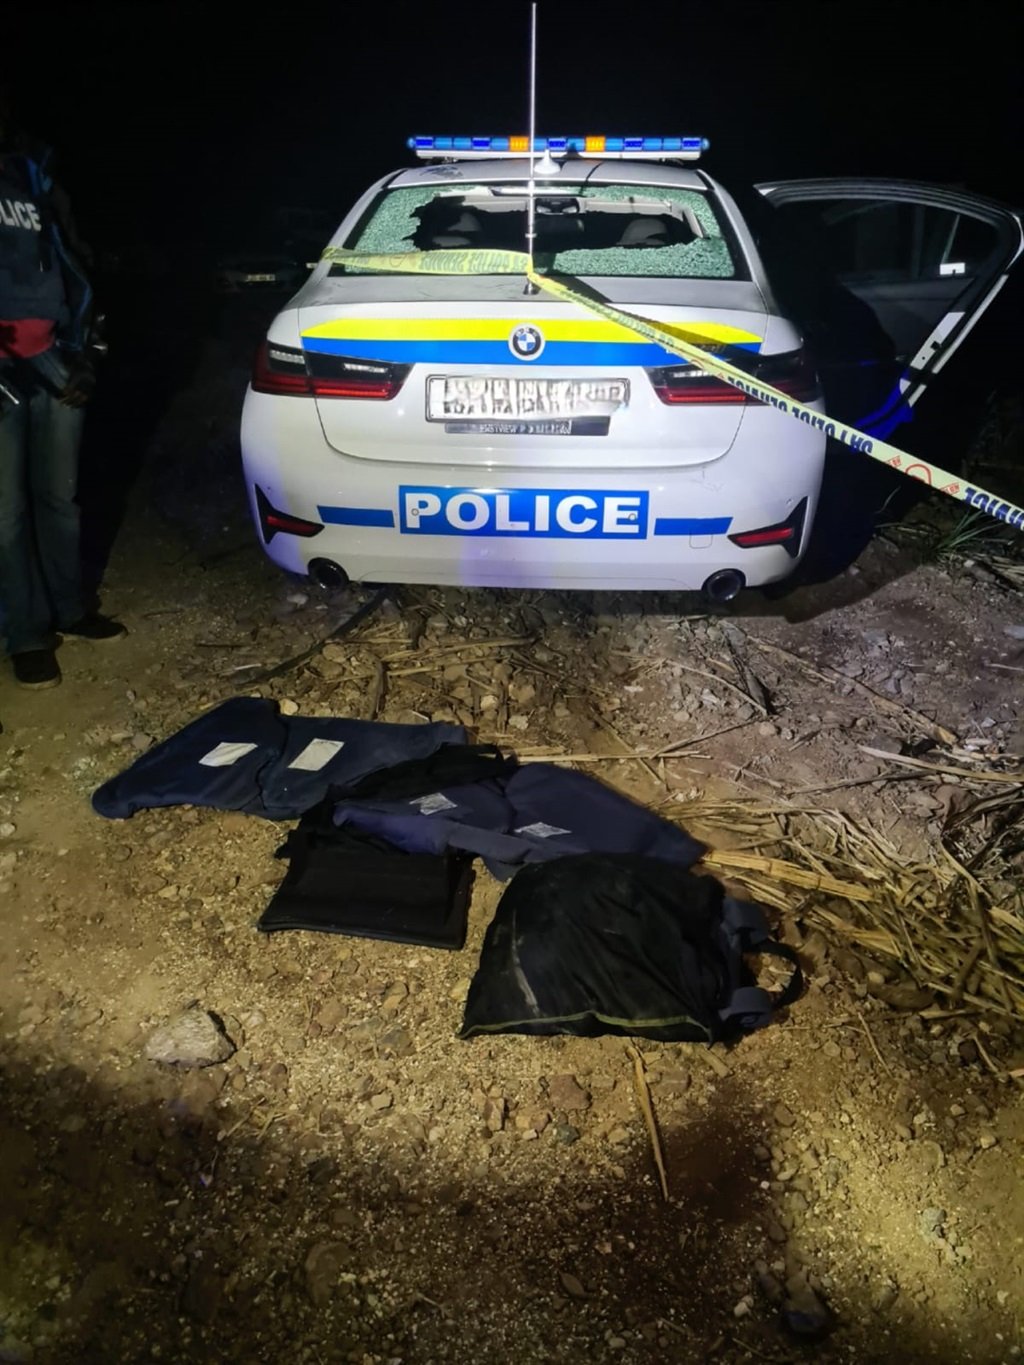 A police vehicle that was used by alleged police officers found with rifles and explosives.